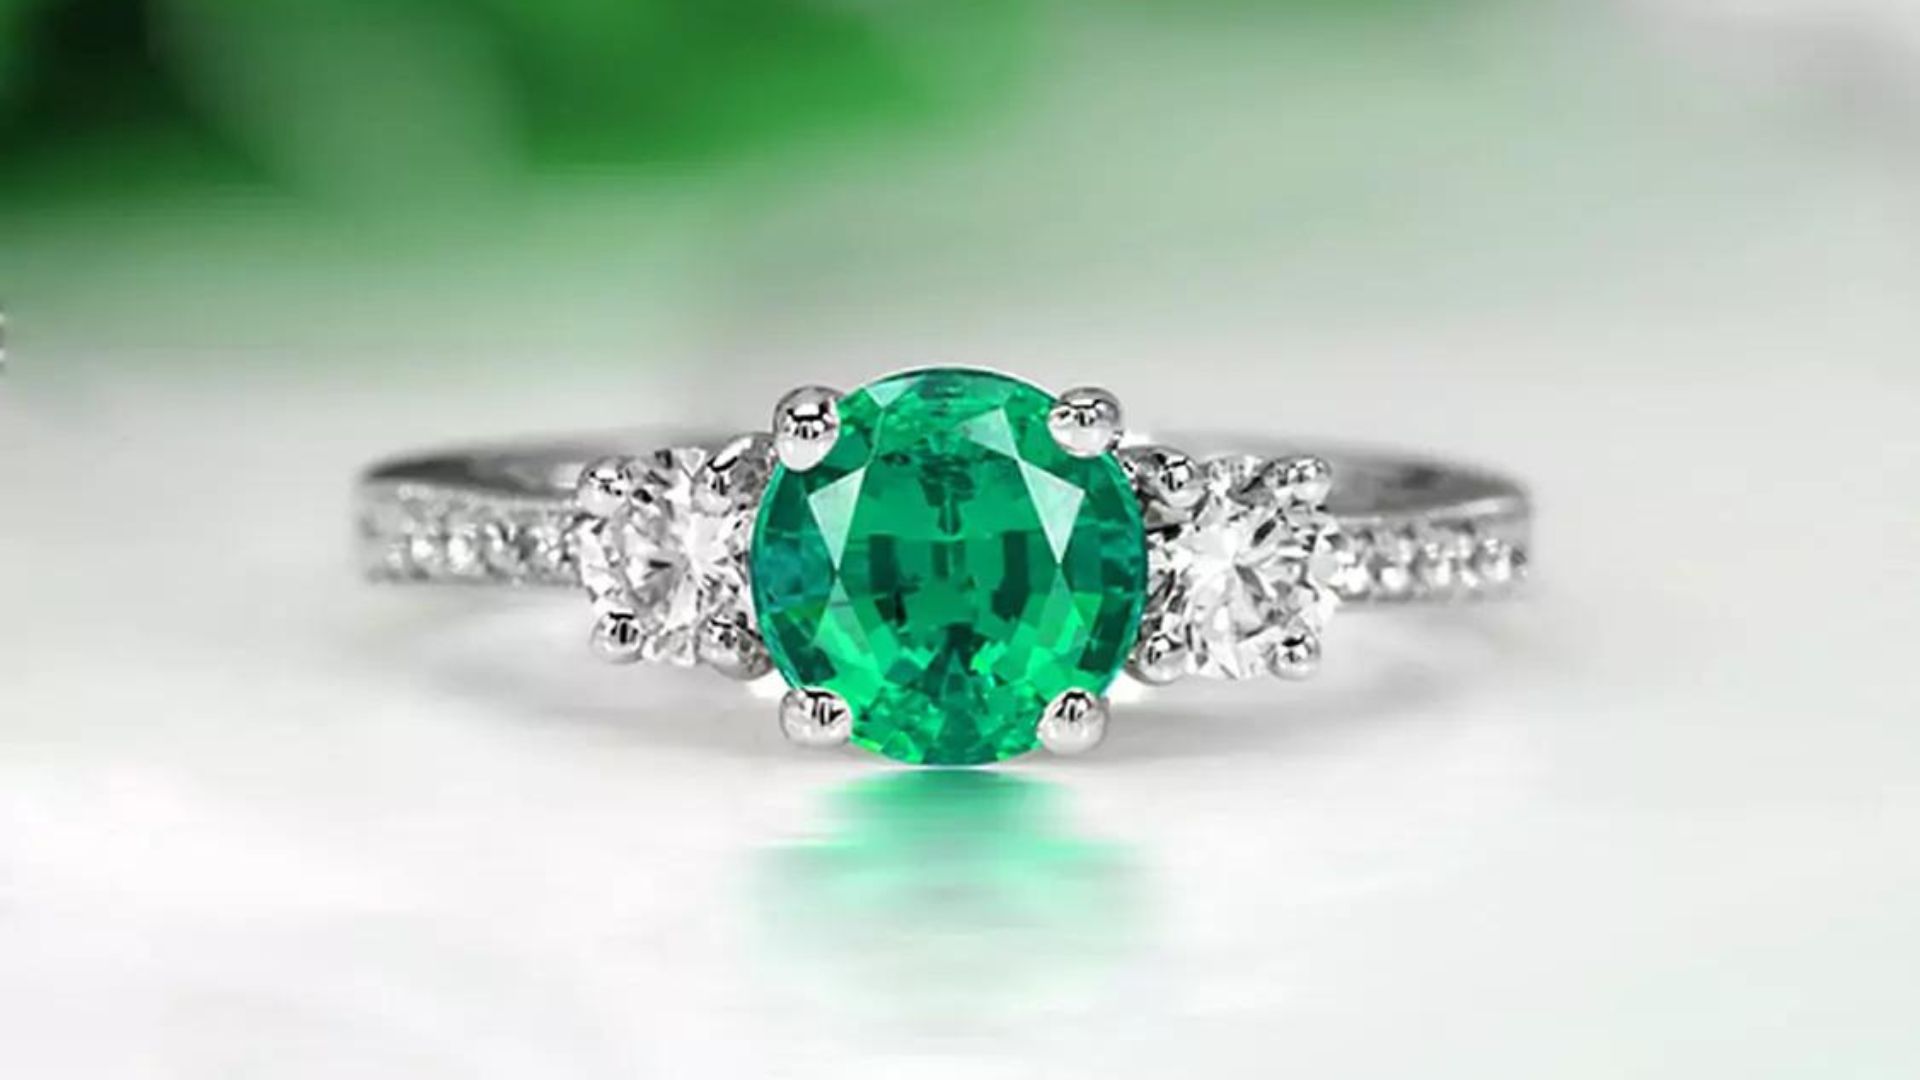 A Silver Ring With Green Stone